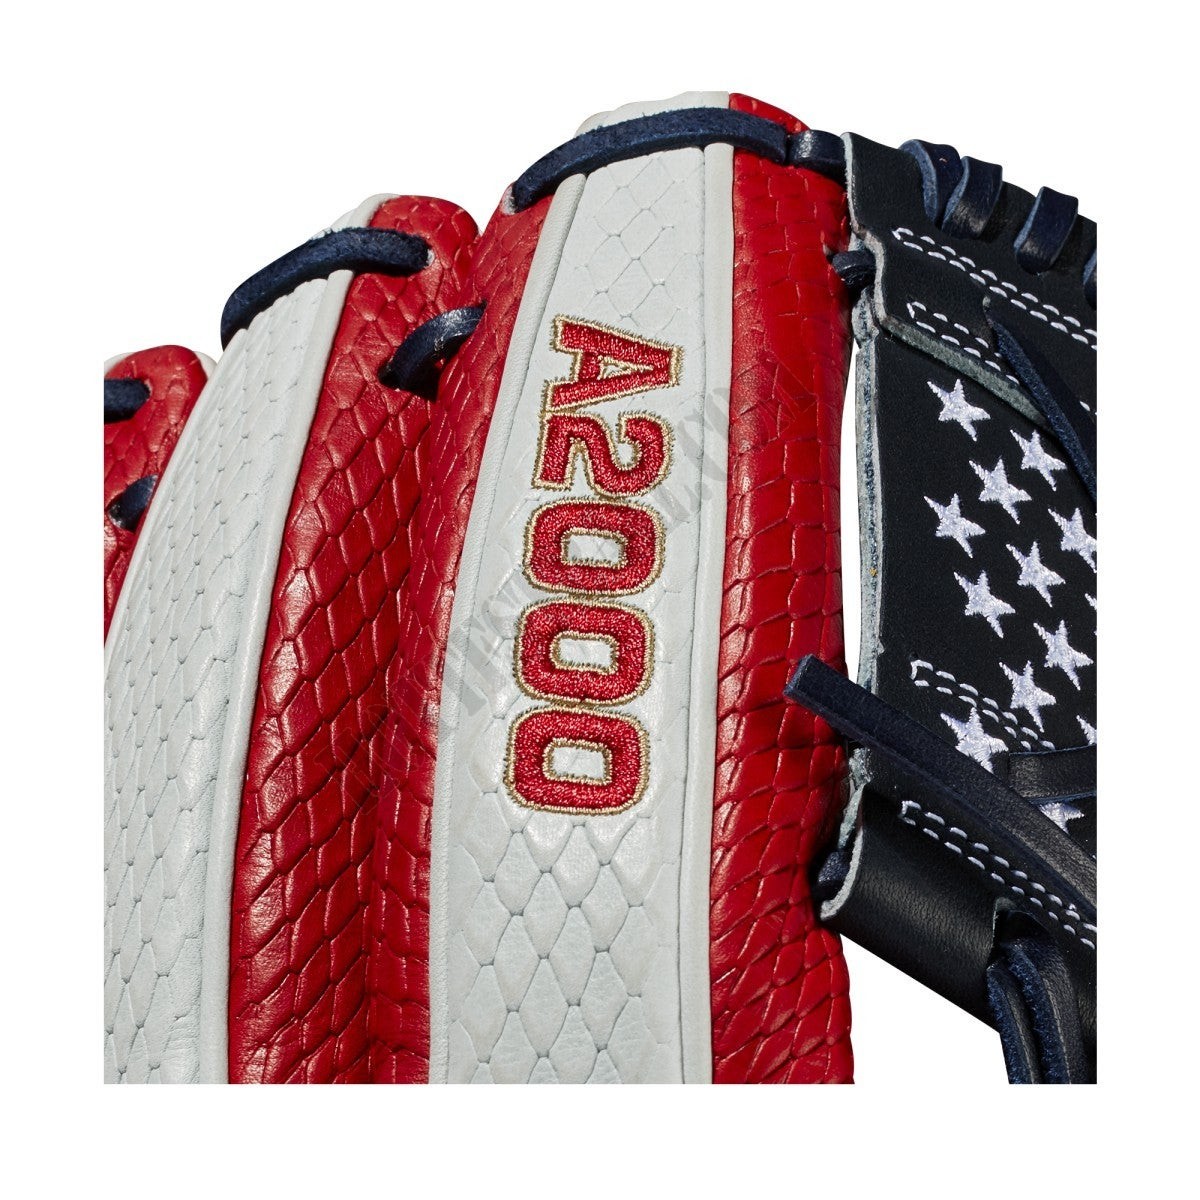 2021 A2000 KS7 GM 12" Infield Fastpitch Glove ● Wilson Promotions - -6